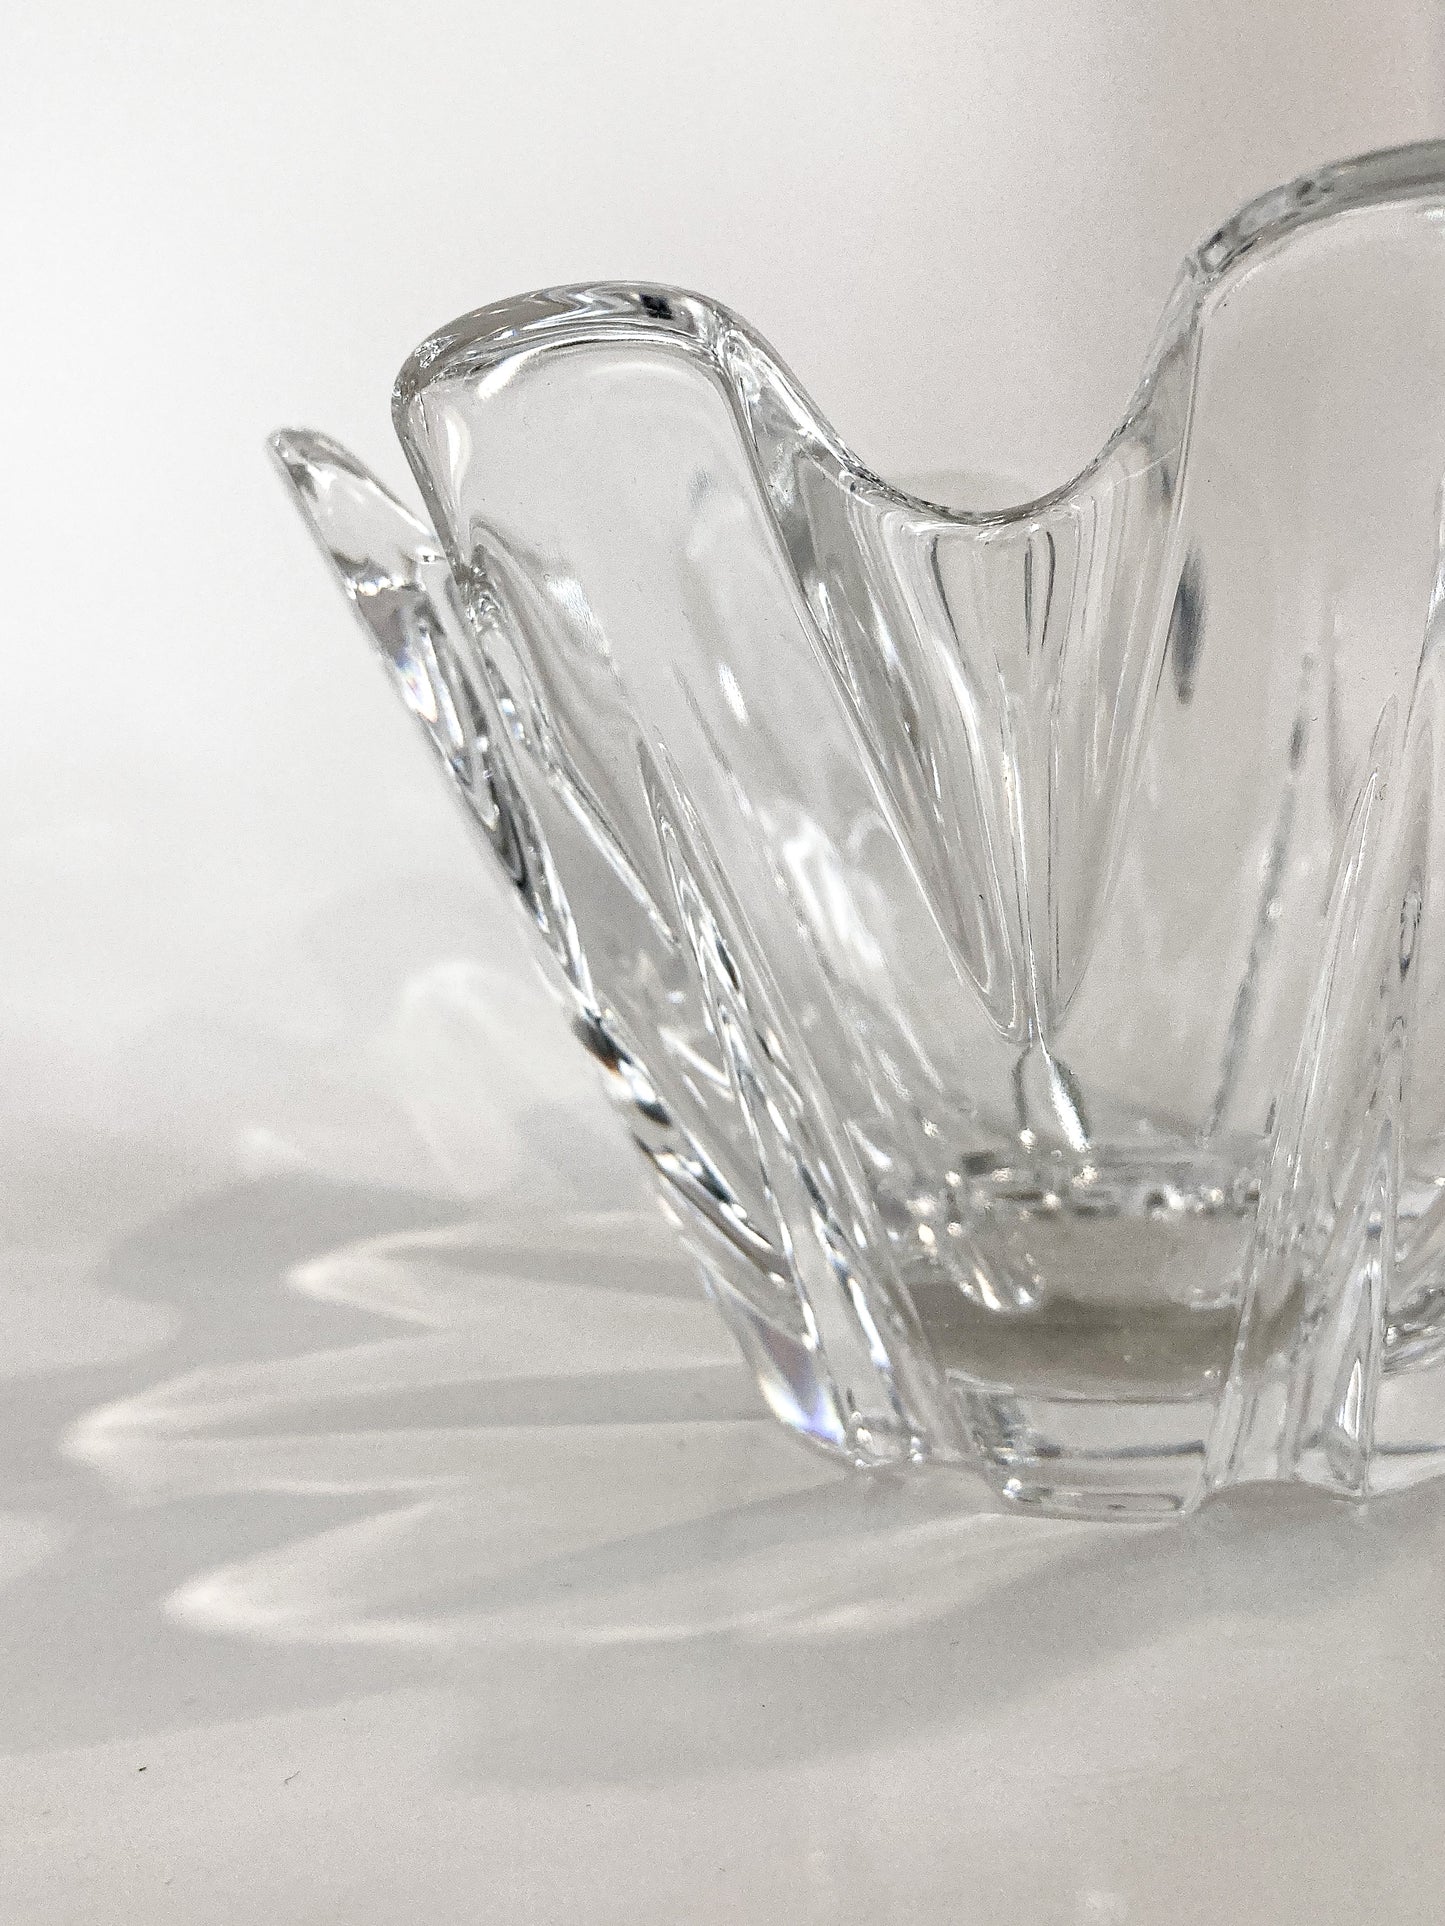 Clear Crystal Glass Scalloped Splash Orrefors Sweden Candy Dish Bowl Profile